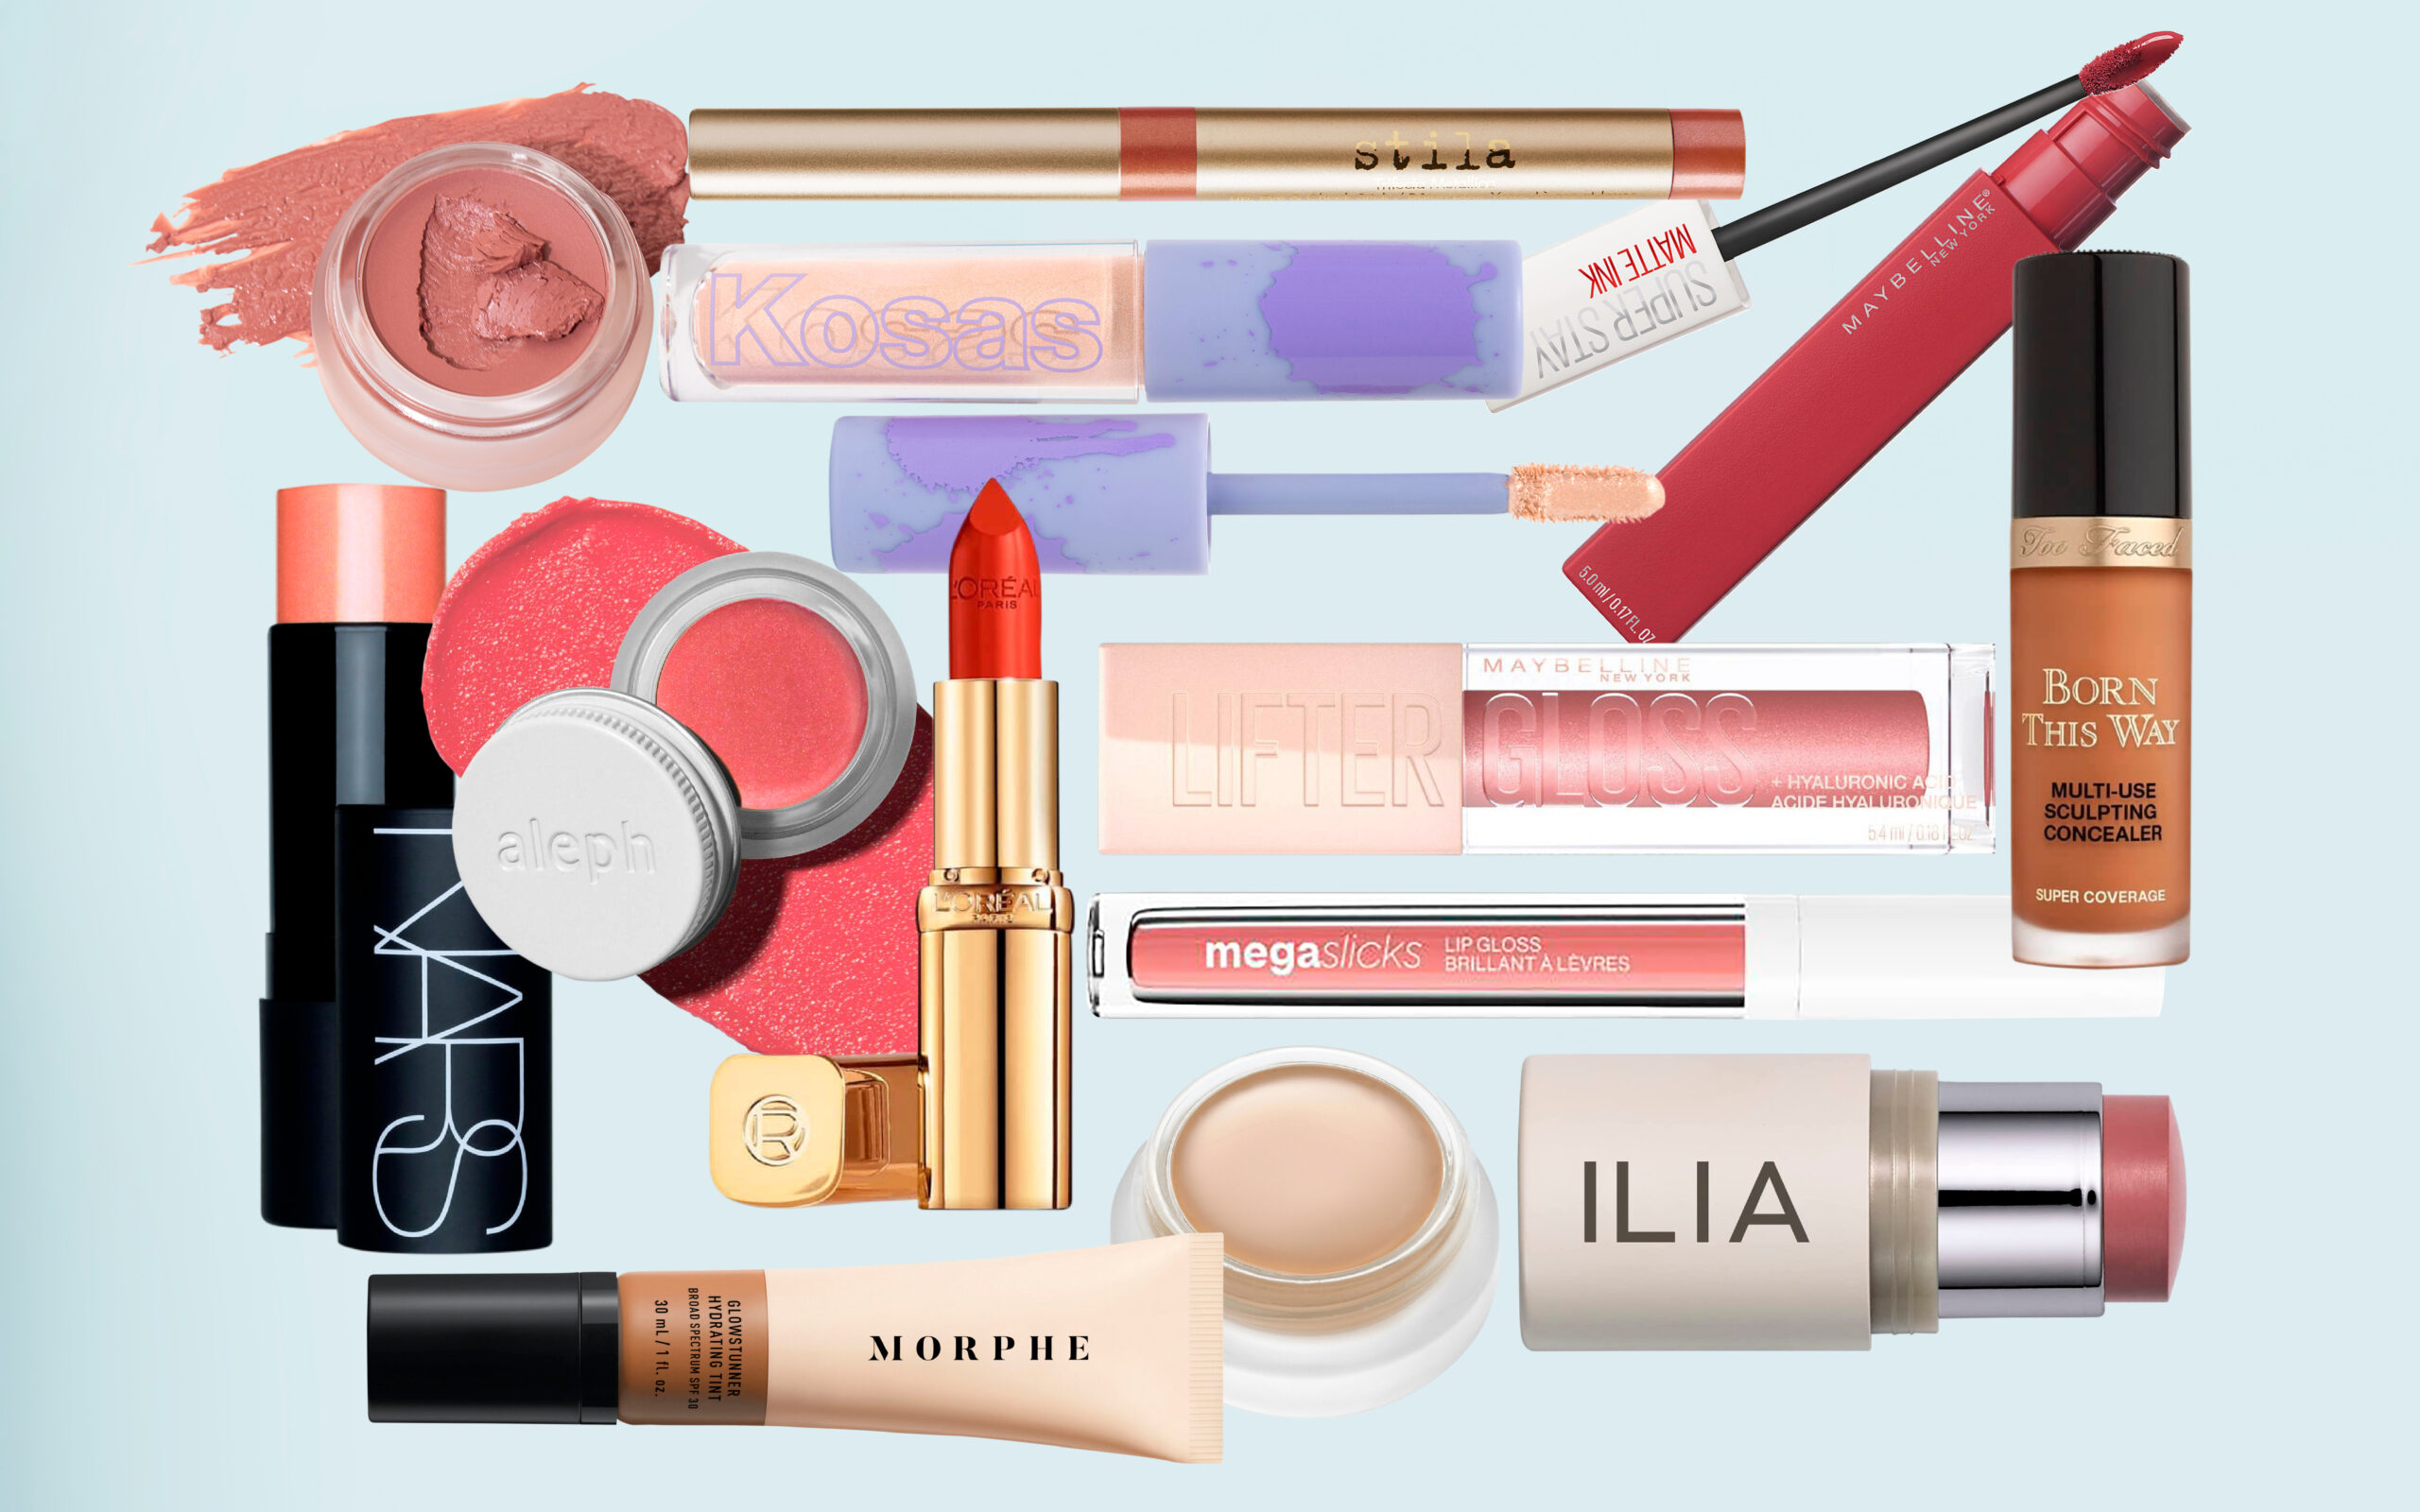 The lazy girl approved makeup products we love